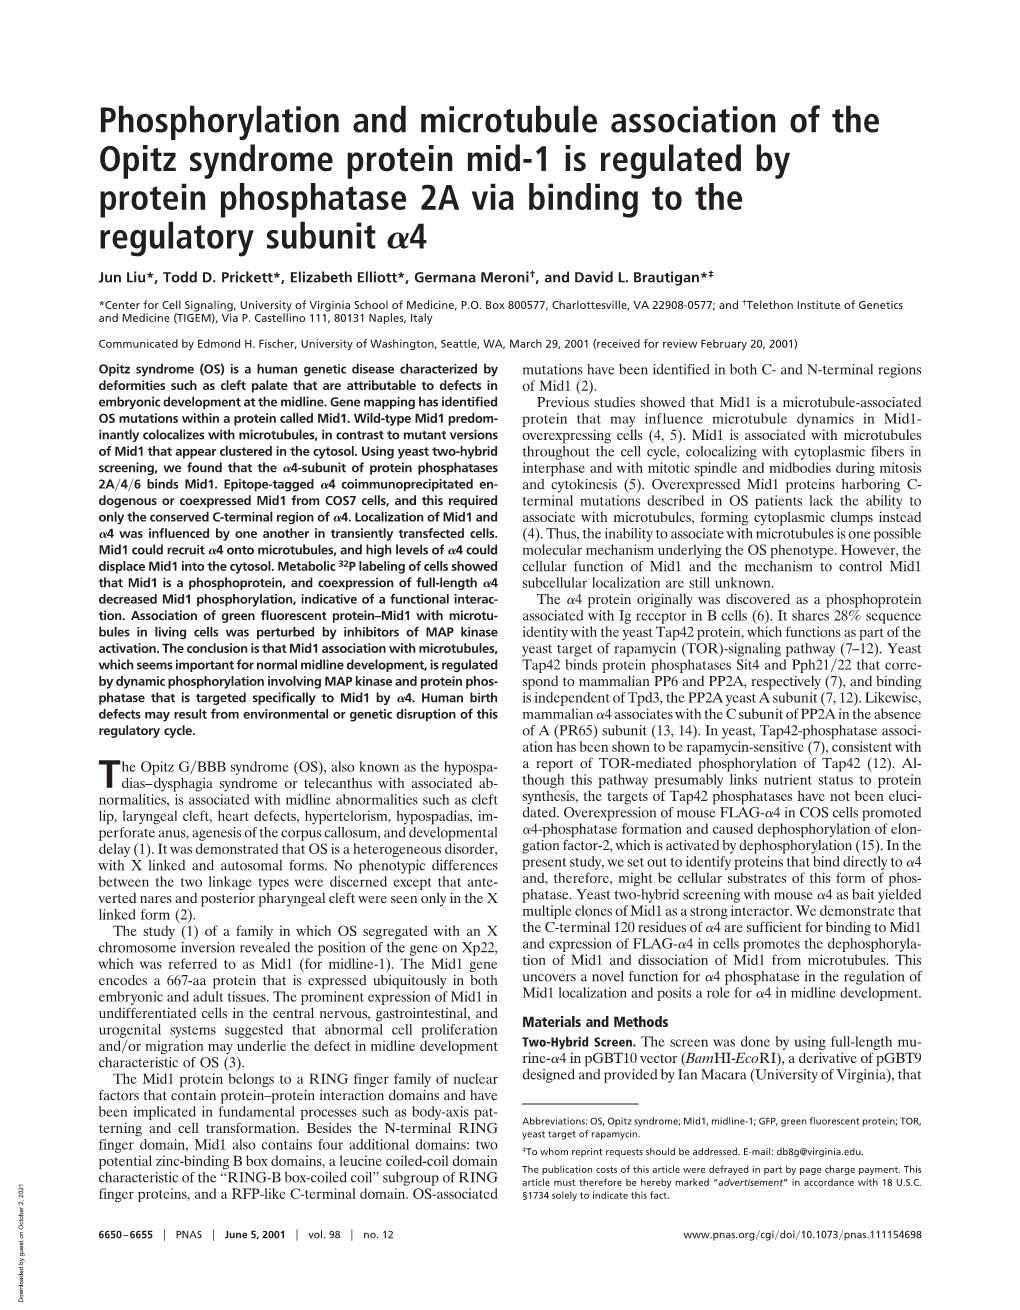 Phosphorylation and Microtubule Association of the Opitz Syndrome Protein Mid-1 Is Regulated by Protein Phosphatase 2A Via Binding to the Regulatory Subunit ␣4